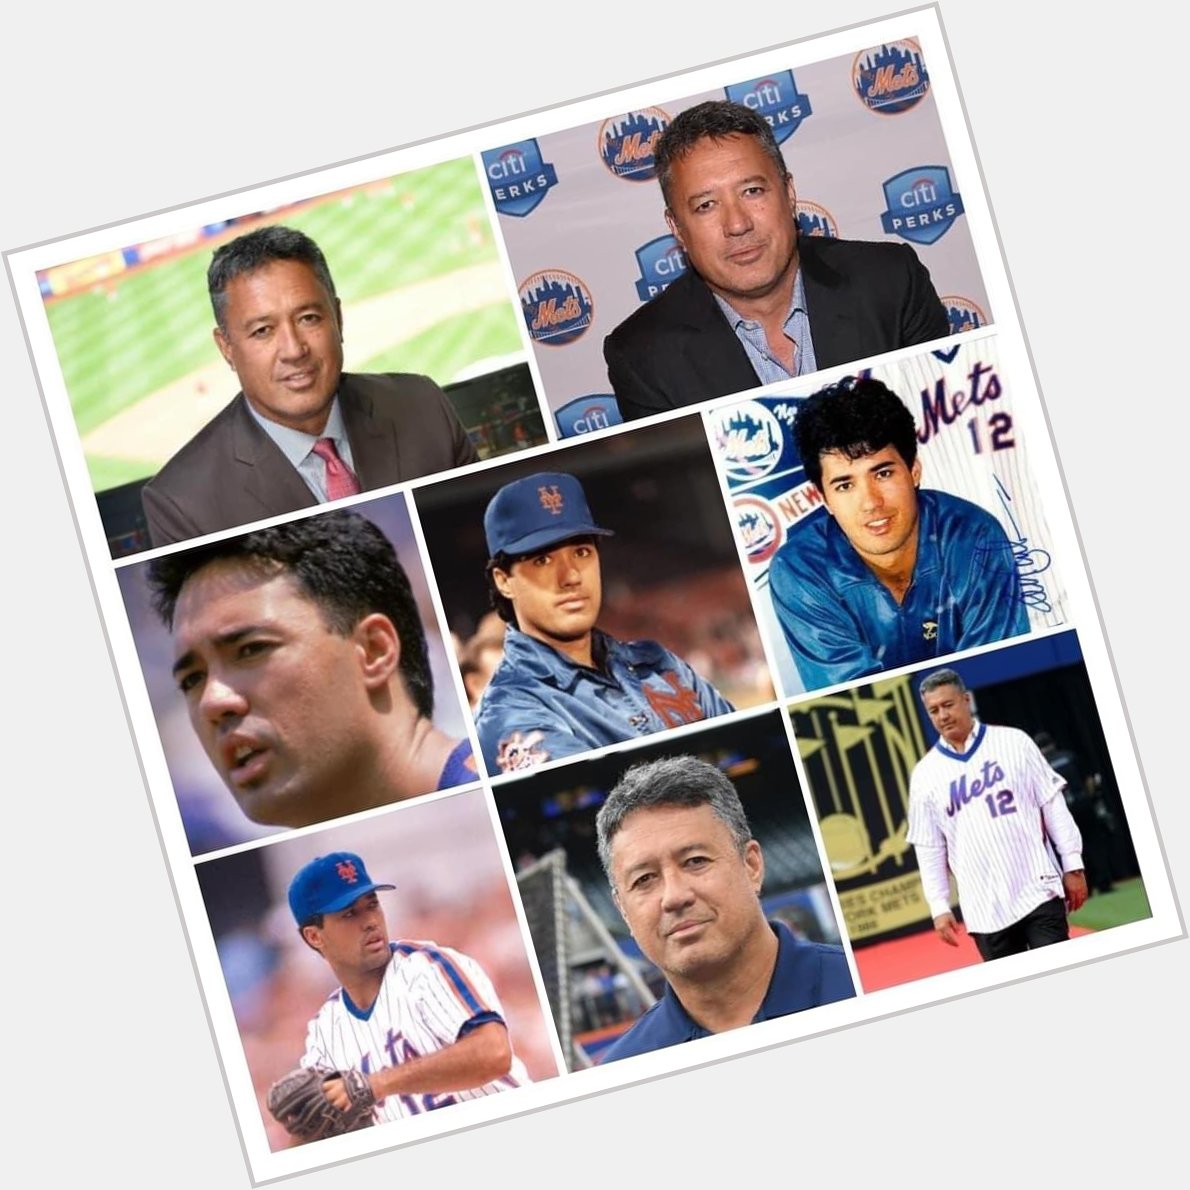 Happy 60th birthday to Mets pitching great and broadcaster, Ron Darling. 